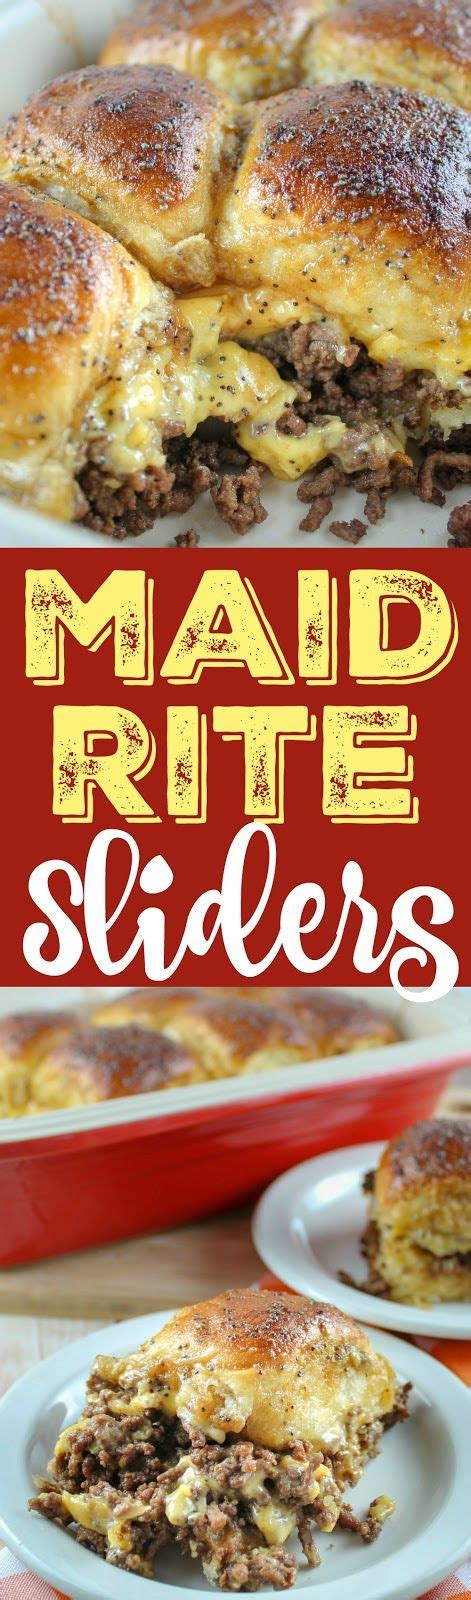 Maid Rites Are An Iowa Specialty Also Known As A Loose Meat Sandwich